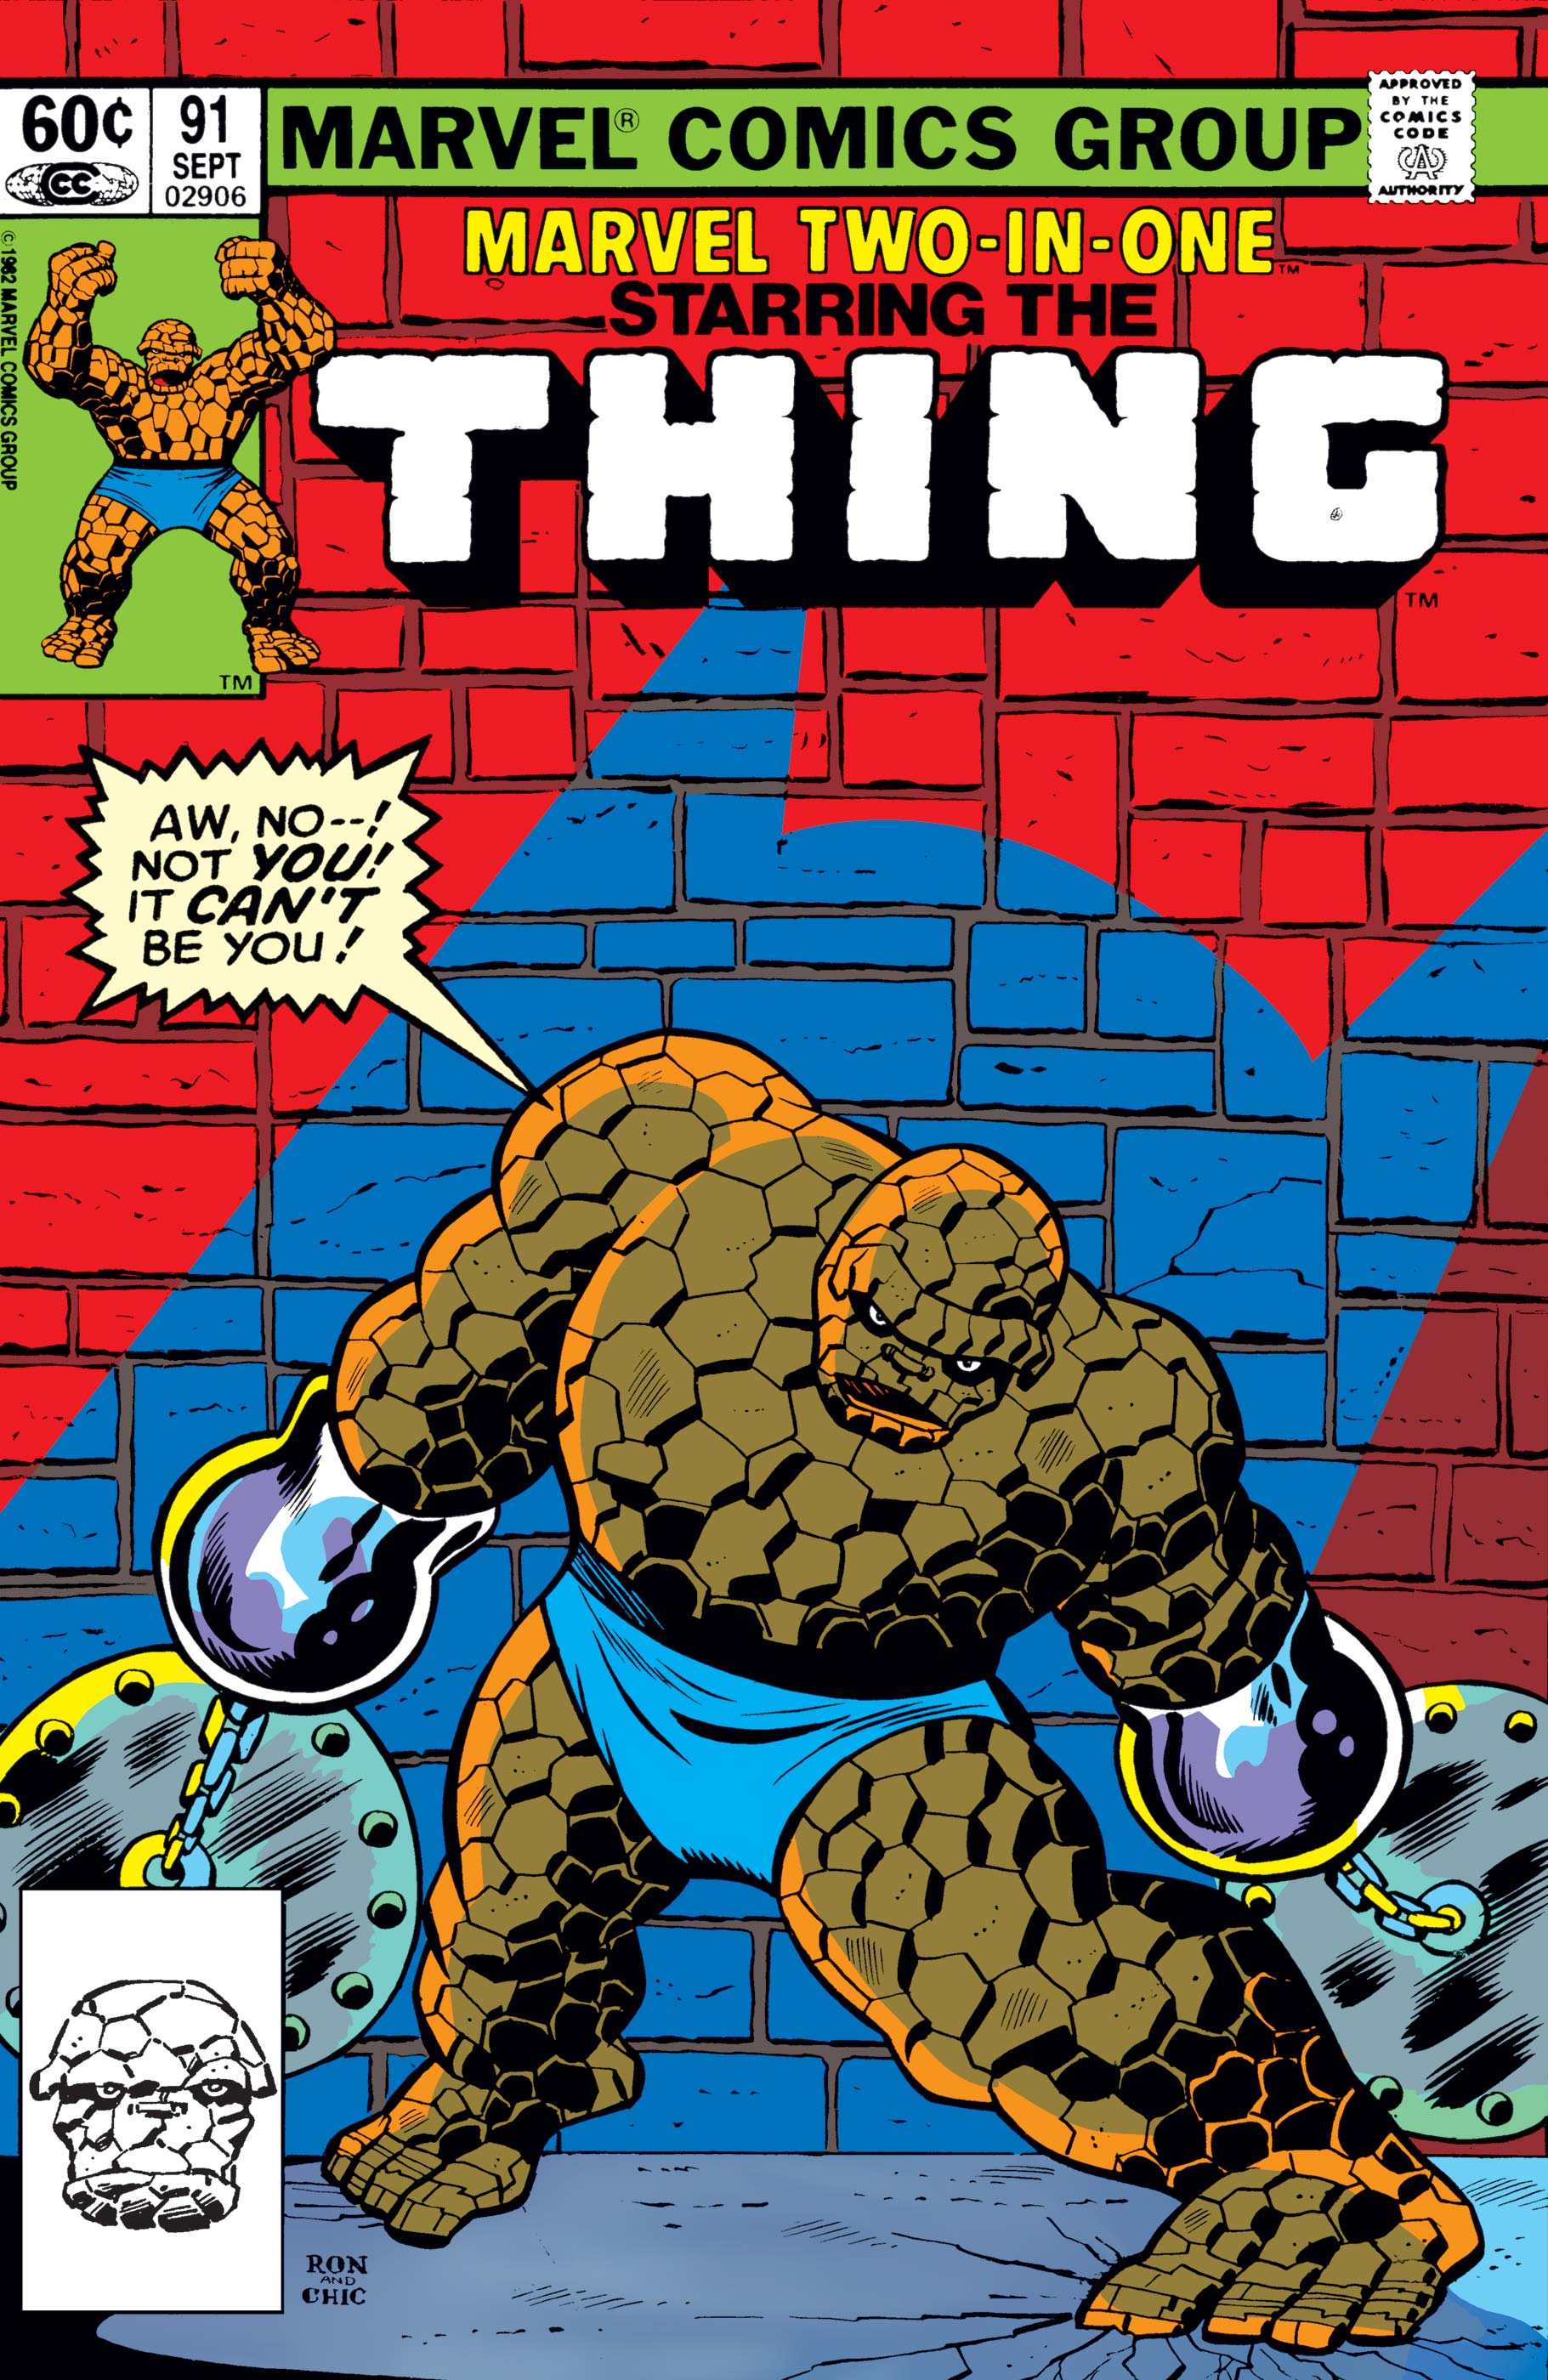 Marvel Two-in-One (1974) #91